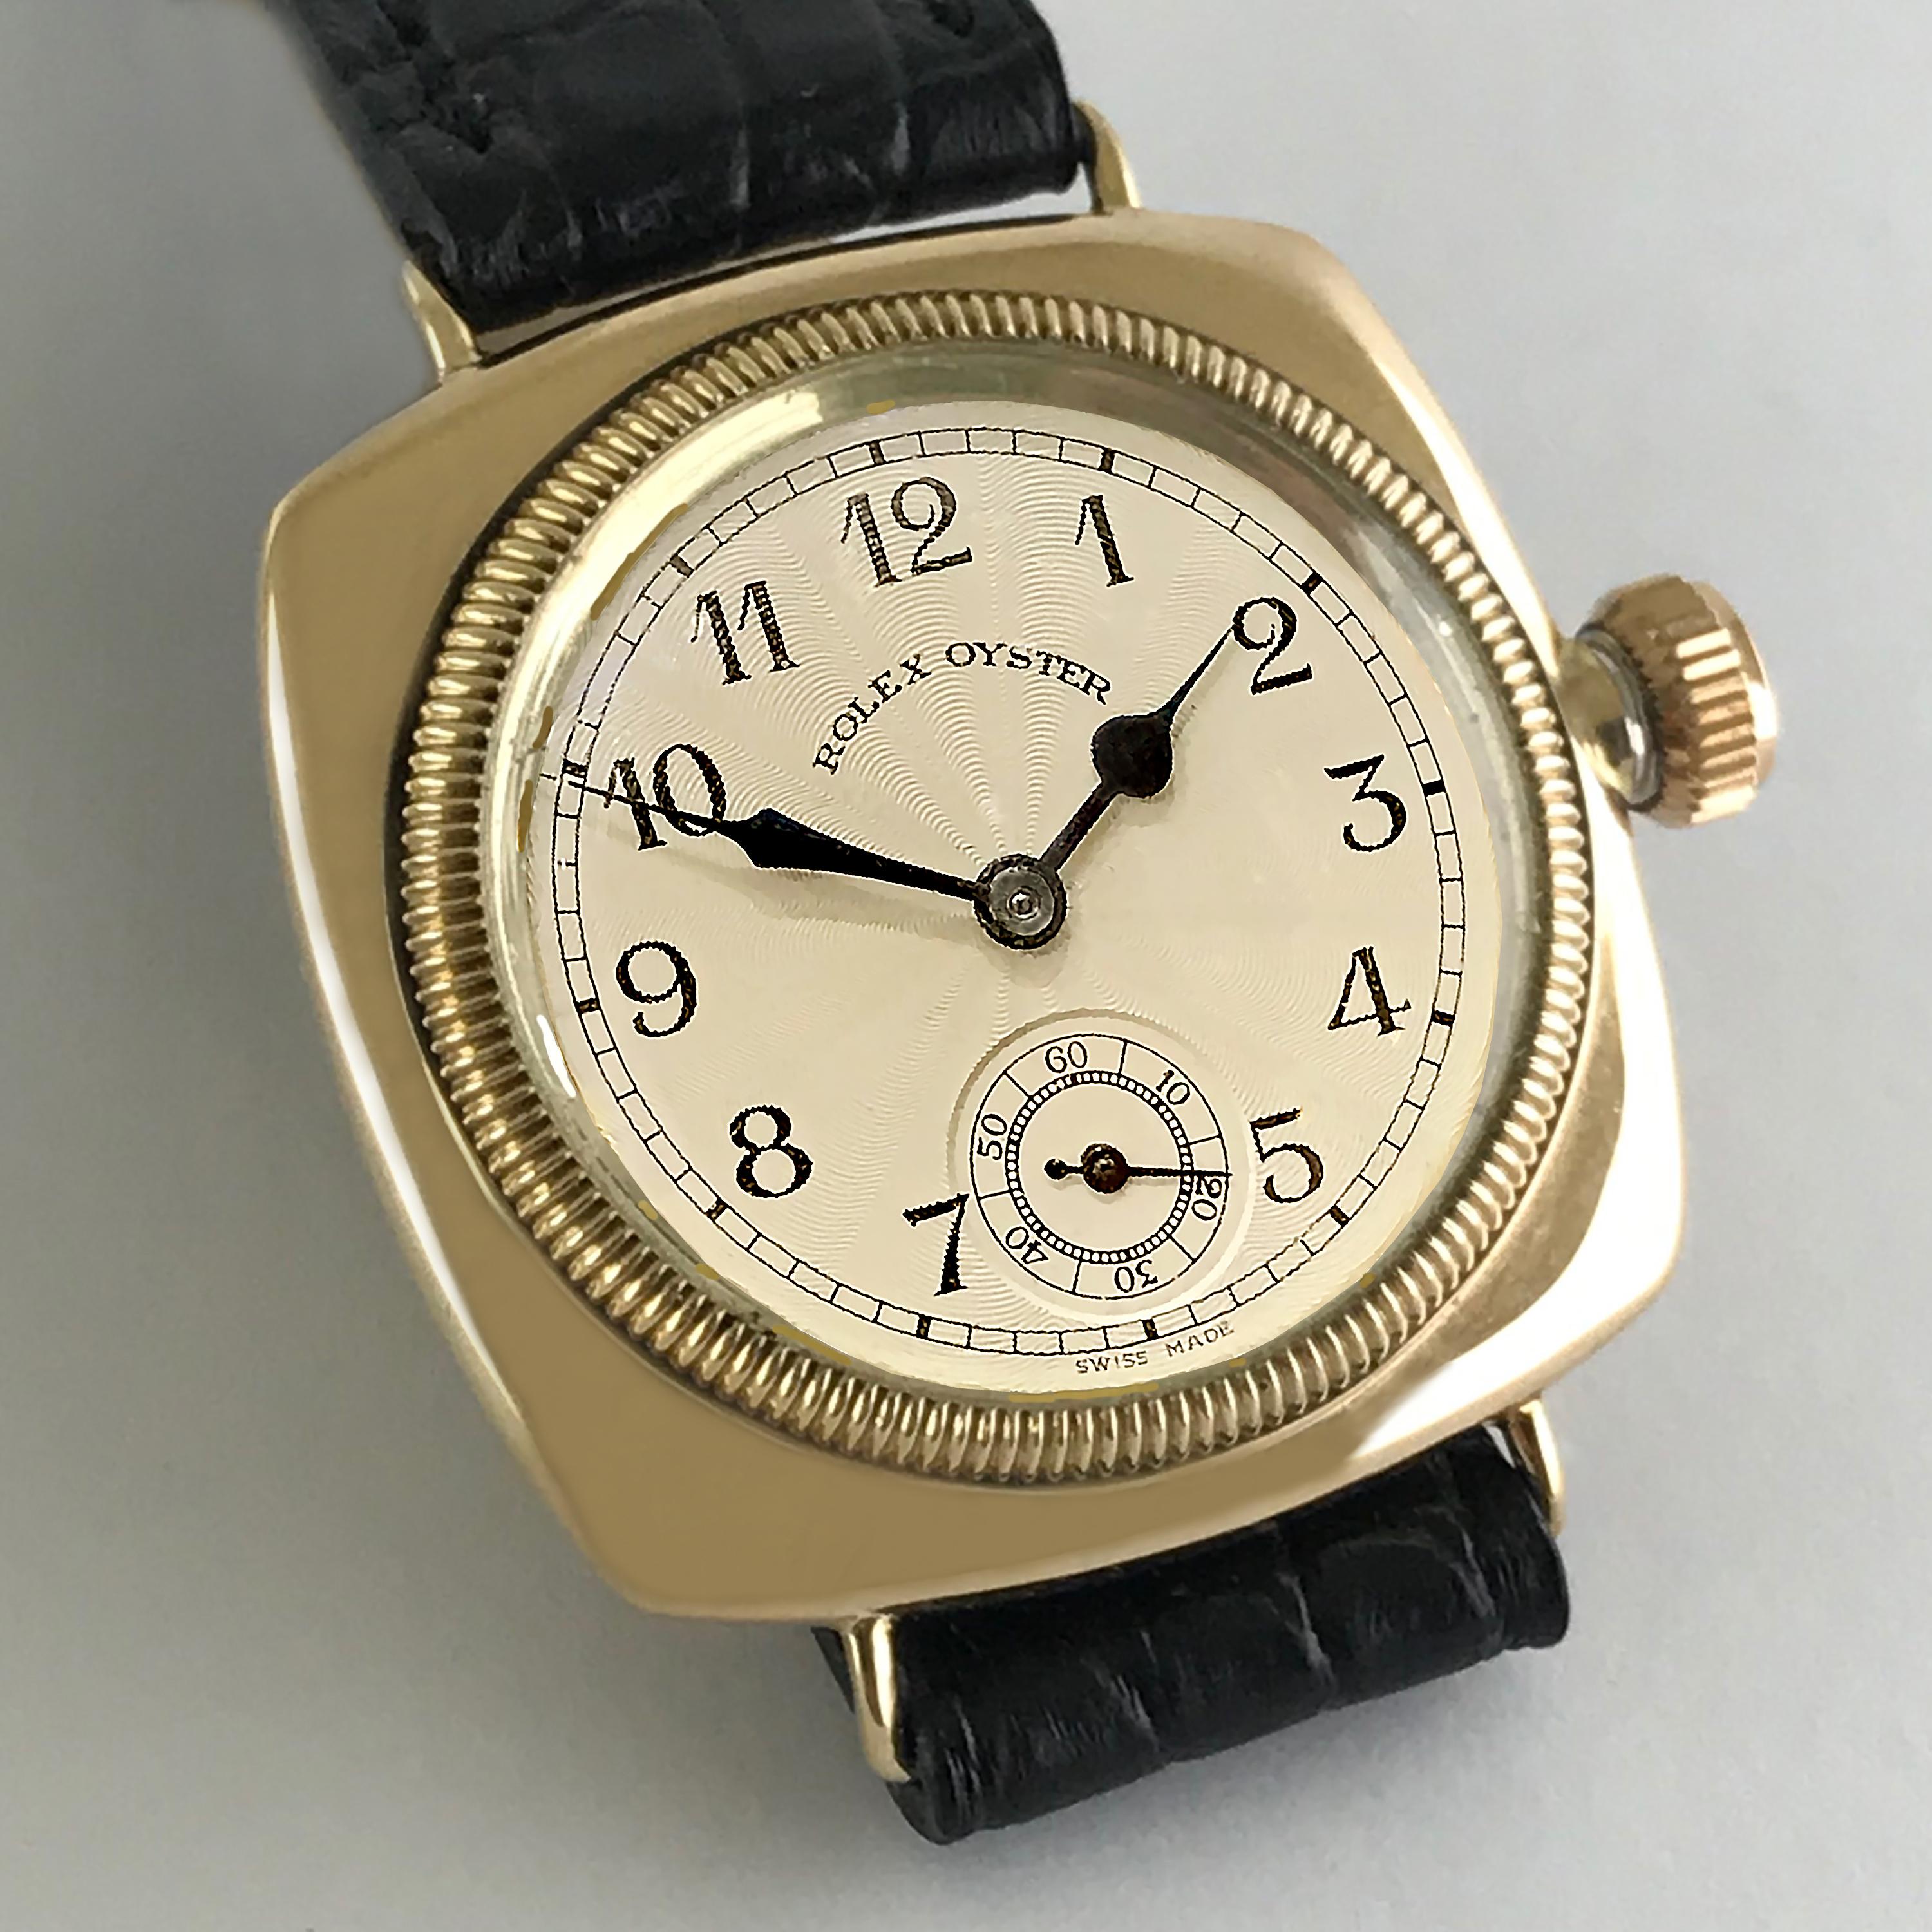 An Art Deco vintage wristwatch by Rolex made in 1930.

The Rolex “Oyster” the world’s first waterproof watch.

In 1927 Hans Wilsdorf, founder of the Rolex Watch Company, sent a newly launched Rolex Oyster to Mercedes Gleitze, to use during her